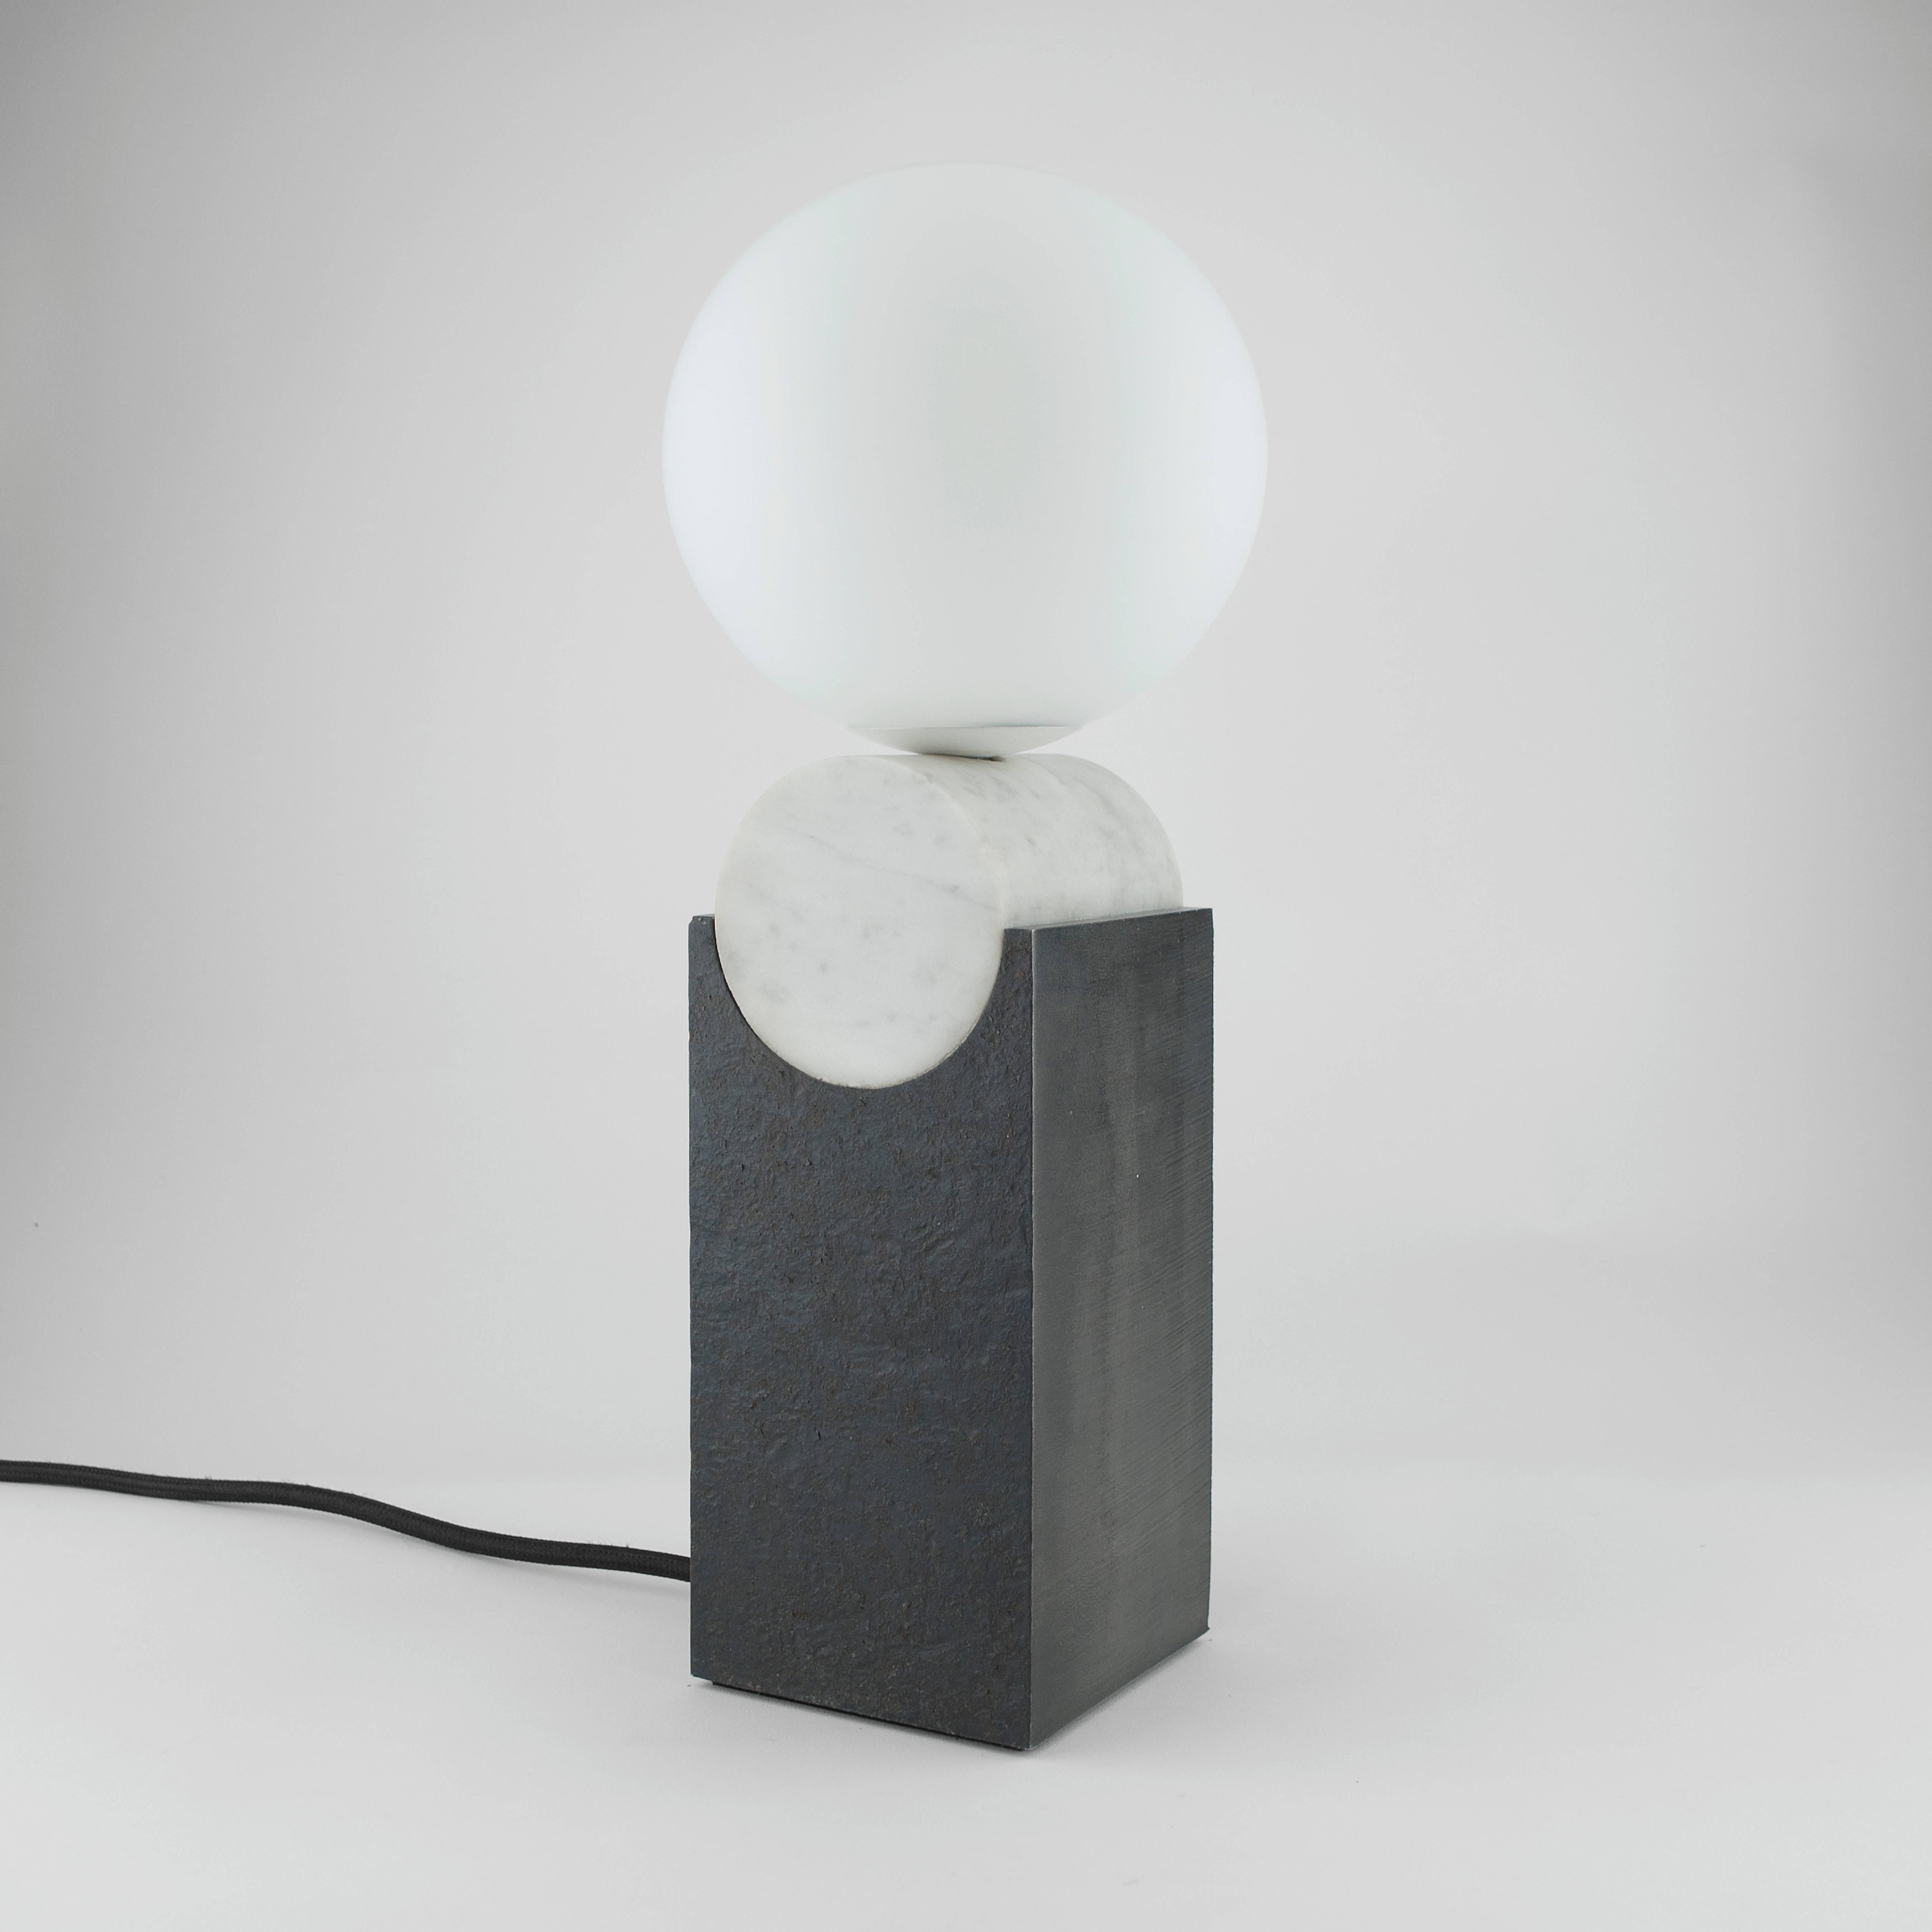 Louis Jobst' Monument Lamp - Circle is high quality, bespoke and handmade using solid raw materials. The base is finished with a black patina and cut from 90mm thick steel billet. Markings from the process are visible and intentionally left,